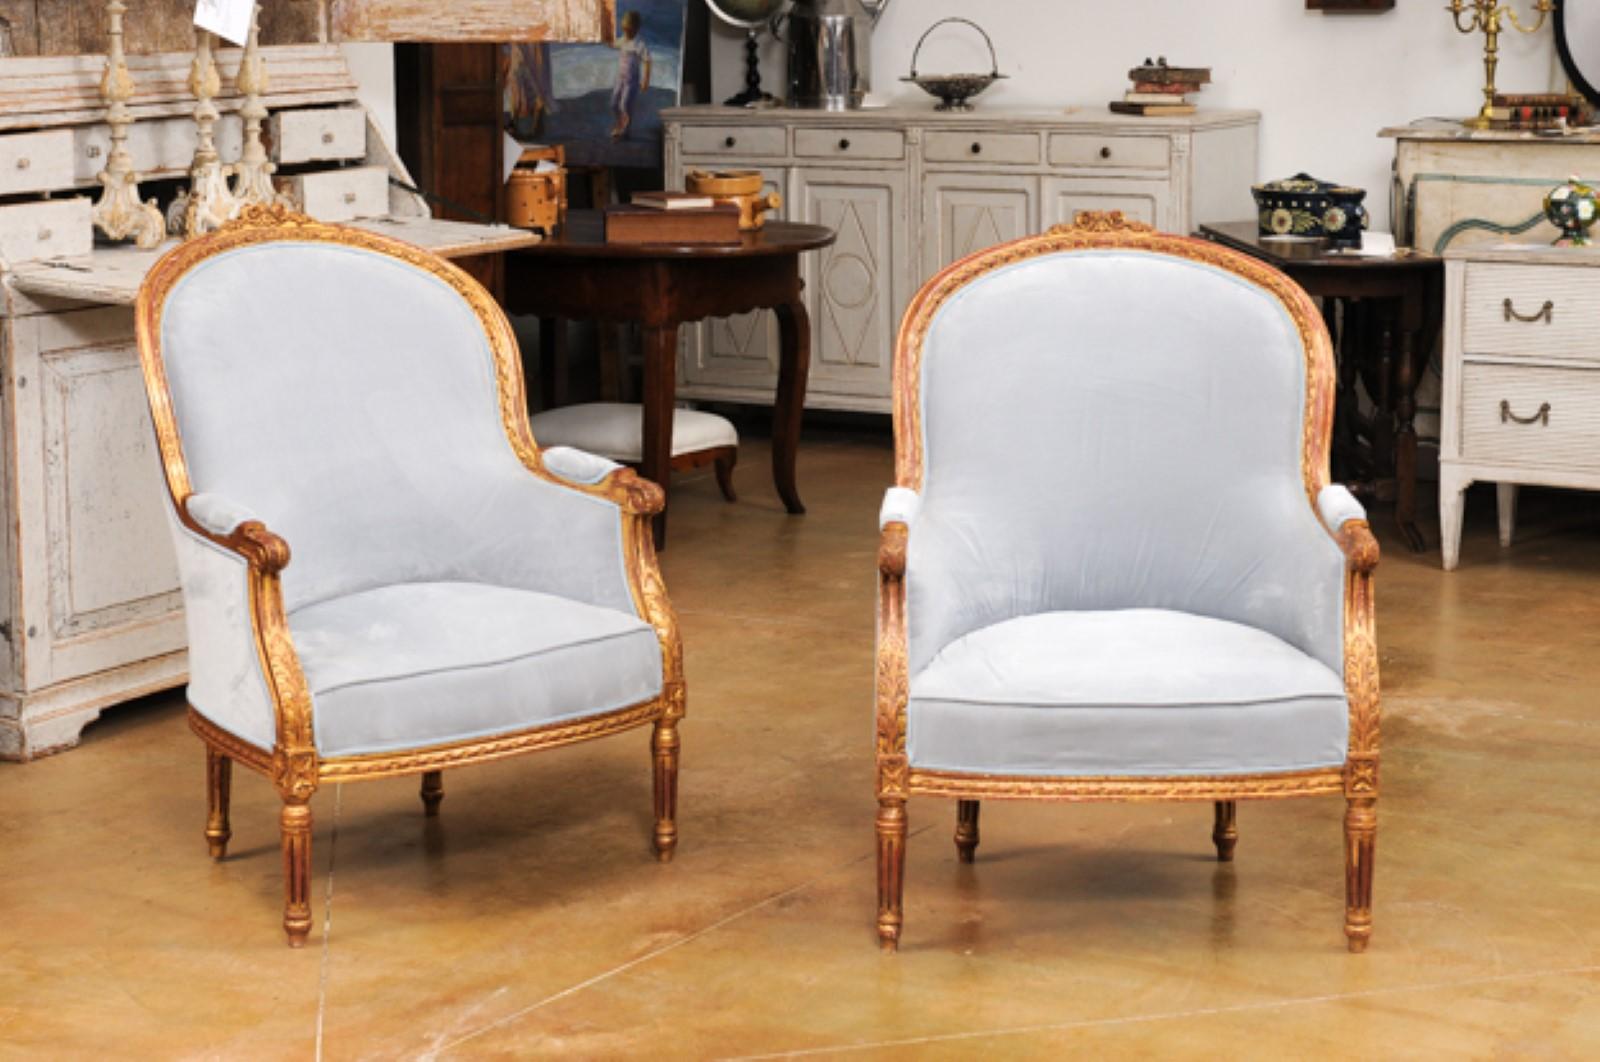 Carved Pair of French Louis XVI Style Gilded Bergère Chairs with Pierre Frey Upholstery